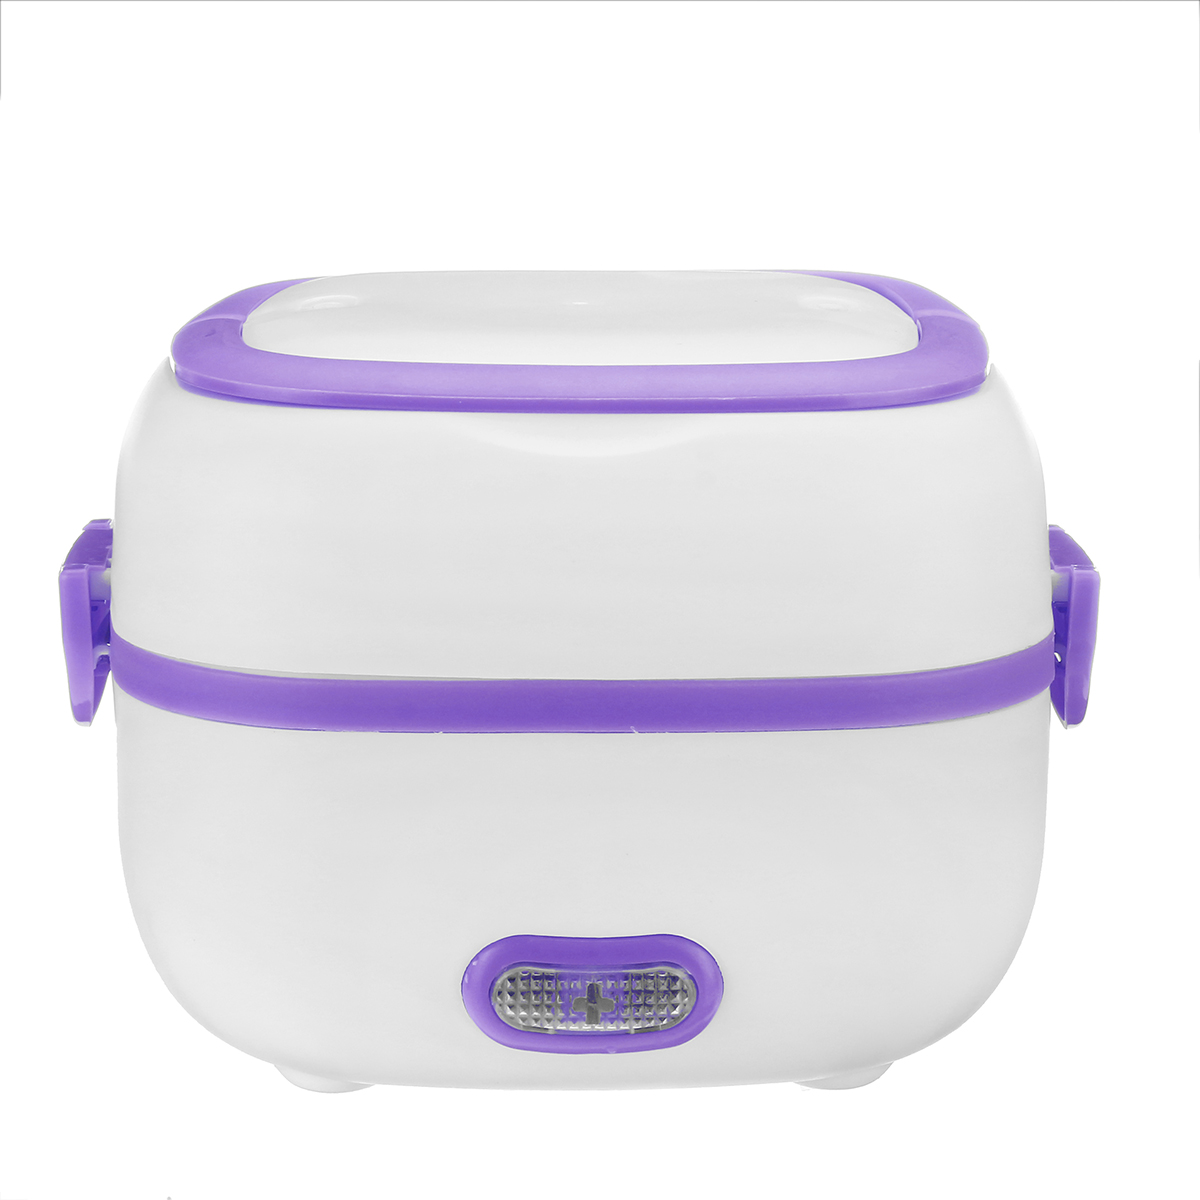 YIMANJIA-XB-2018A-Electric-Heated-Lunch-Box-220V-Portable-2-in-1-Car--Home-US-PlugEU-Plug-1779134-3